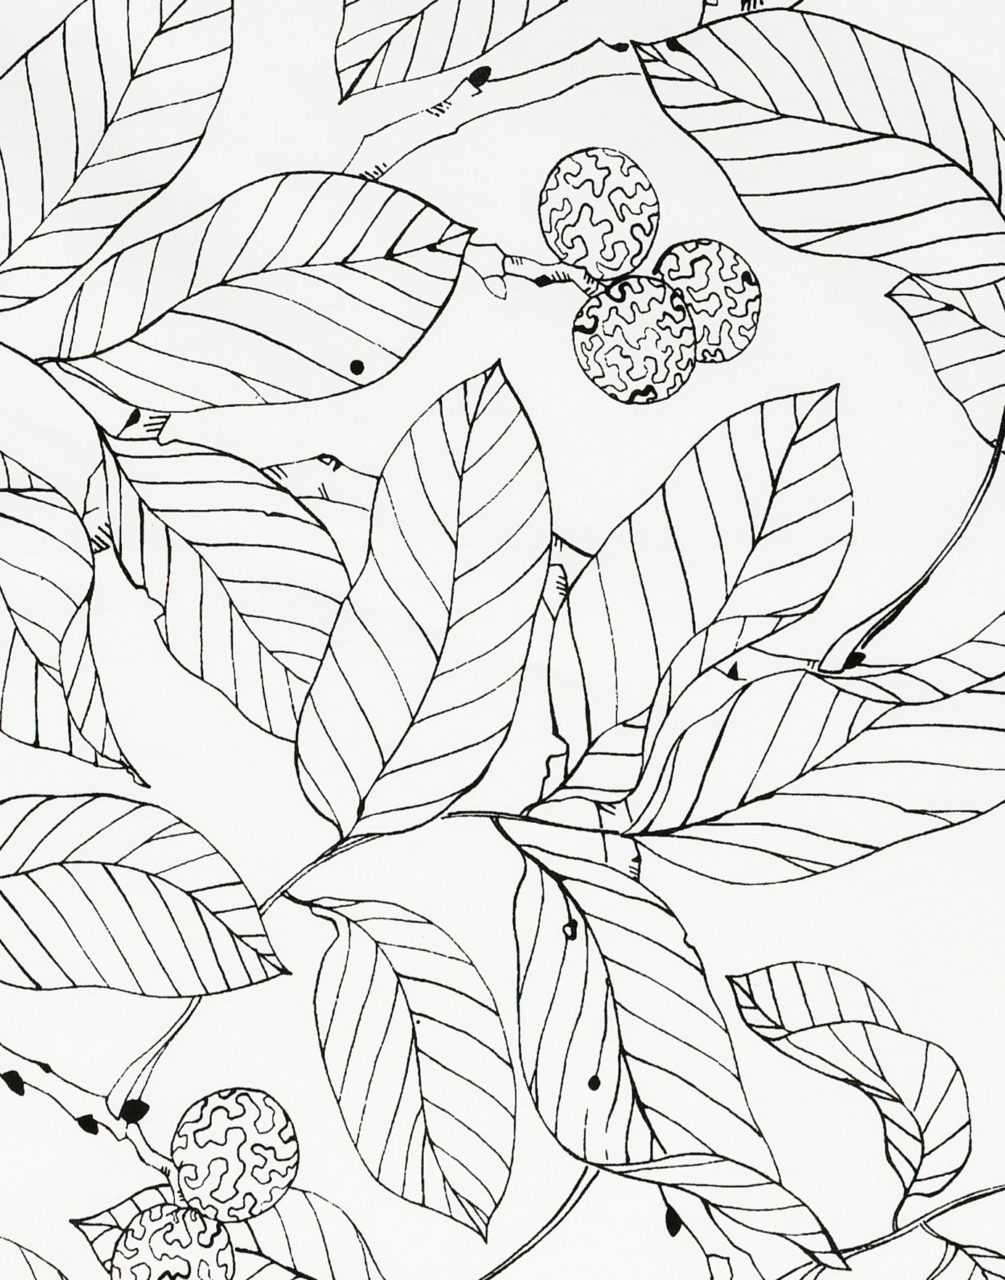 Black and white pattern depicting a stylised fruit tree.